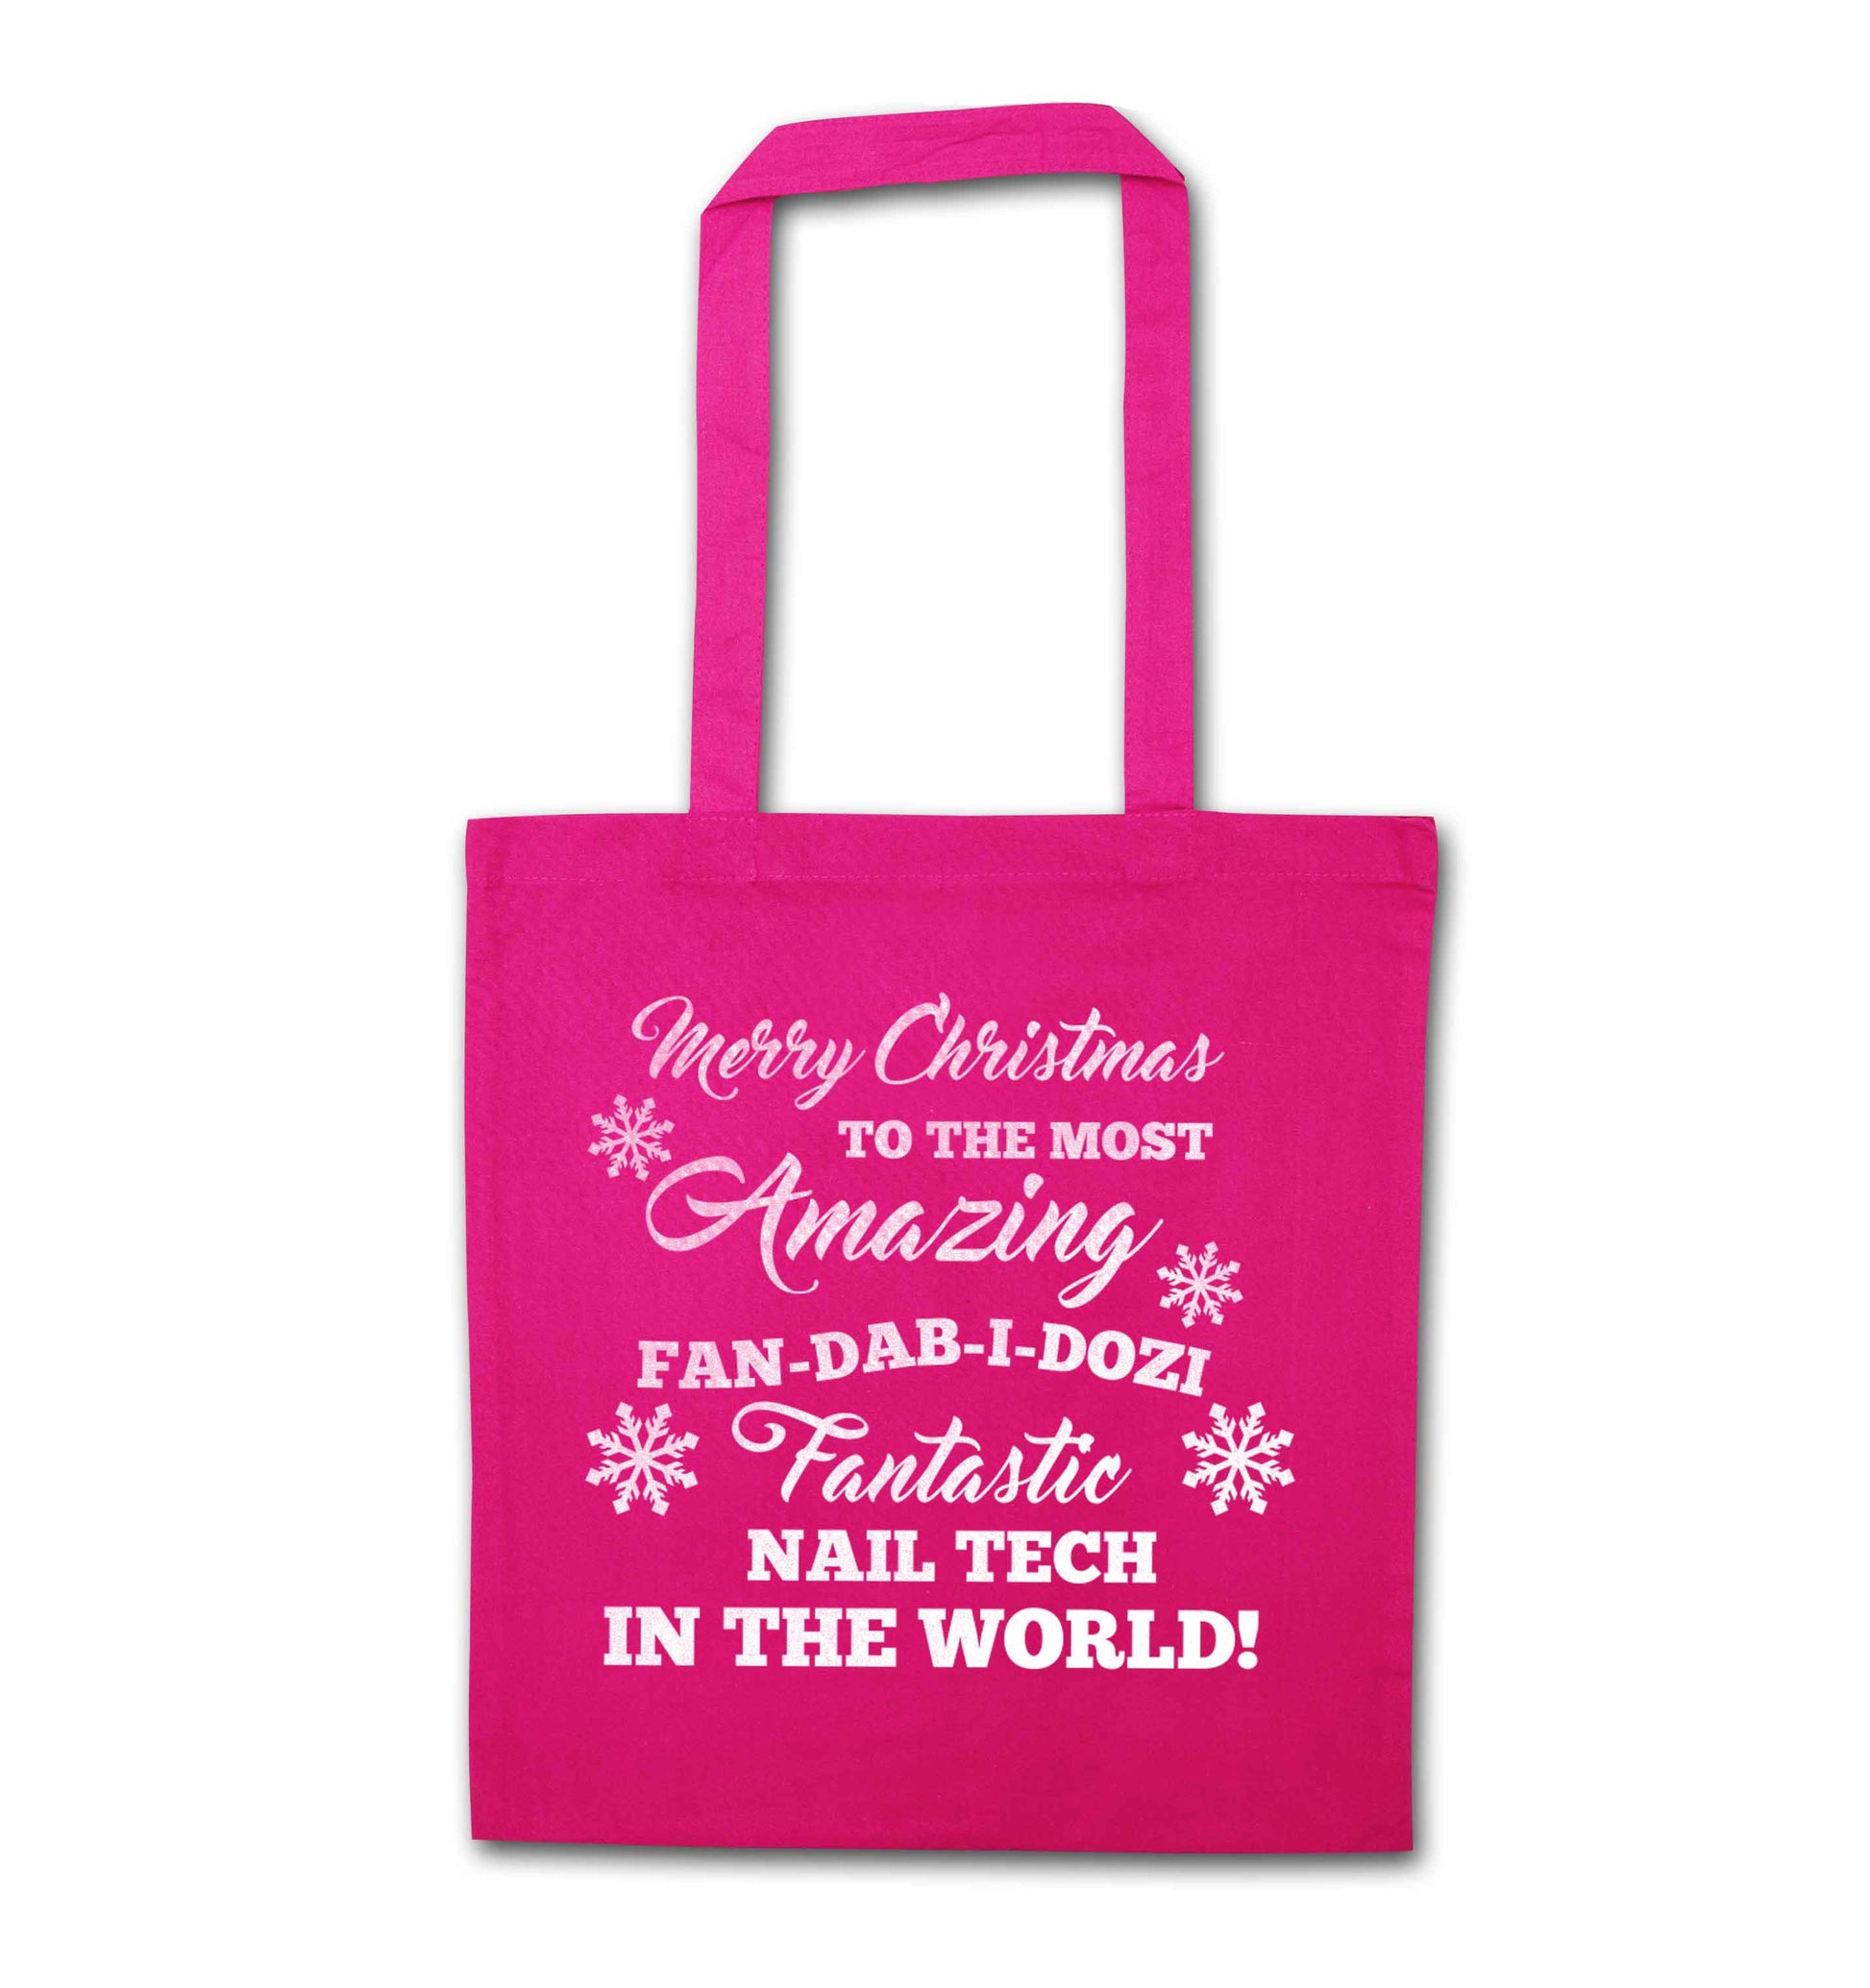 Merry Christmas to the most amazing fan-dab-i-dozi fantasic nail technician in the world pink tote bag